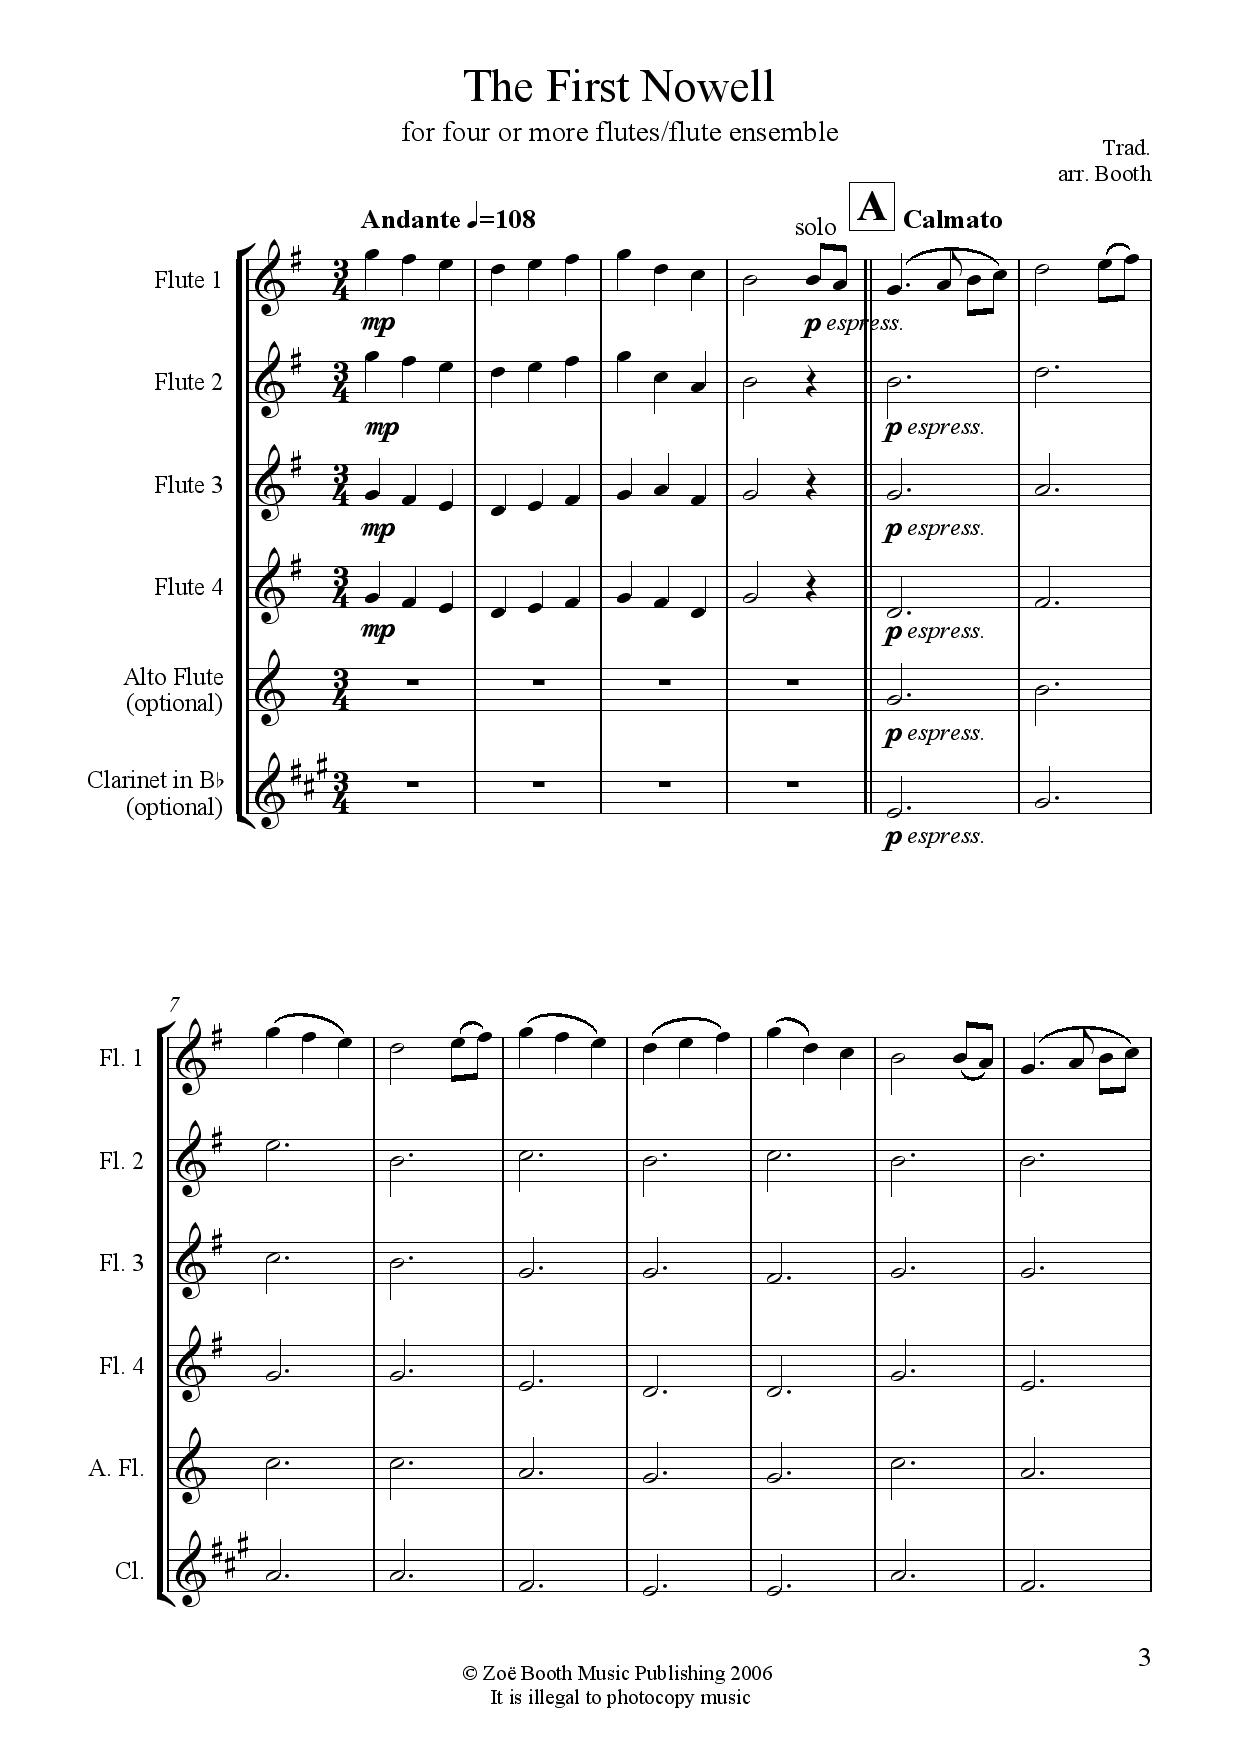 The First Nowell (Traditional),  arranged by Zoë Booth for four or more flutes/flute choir